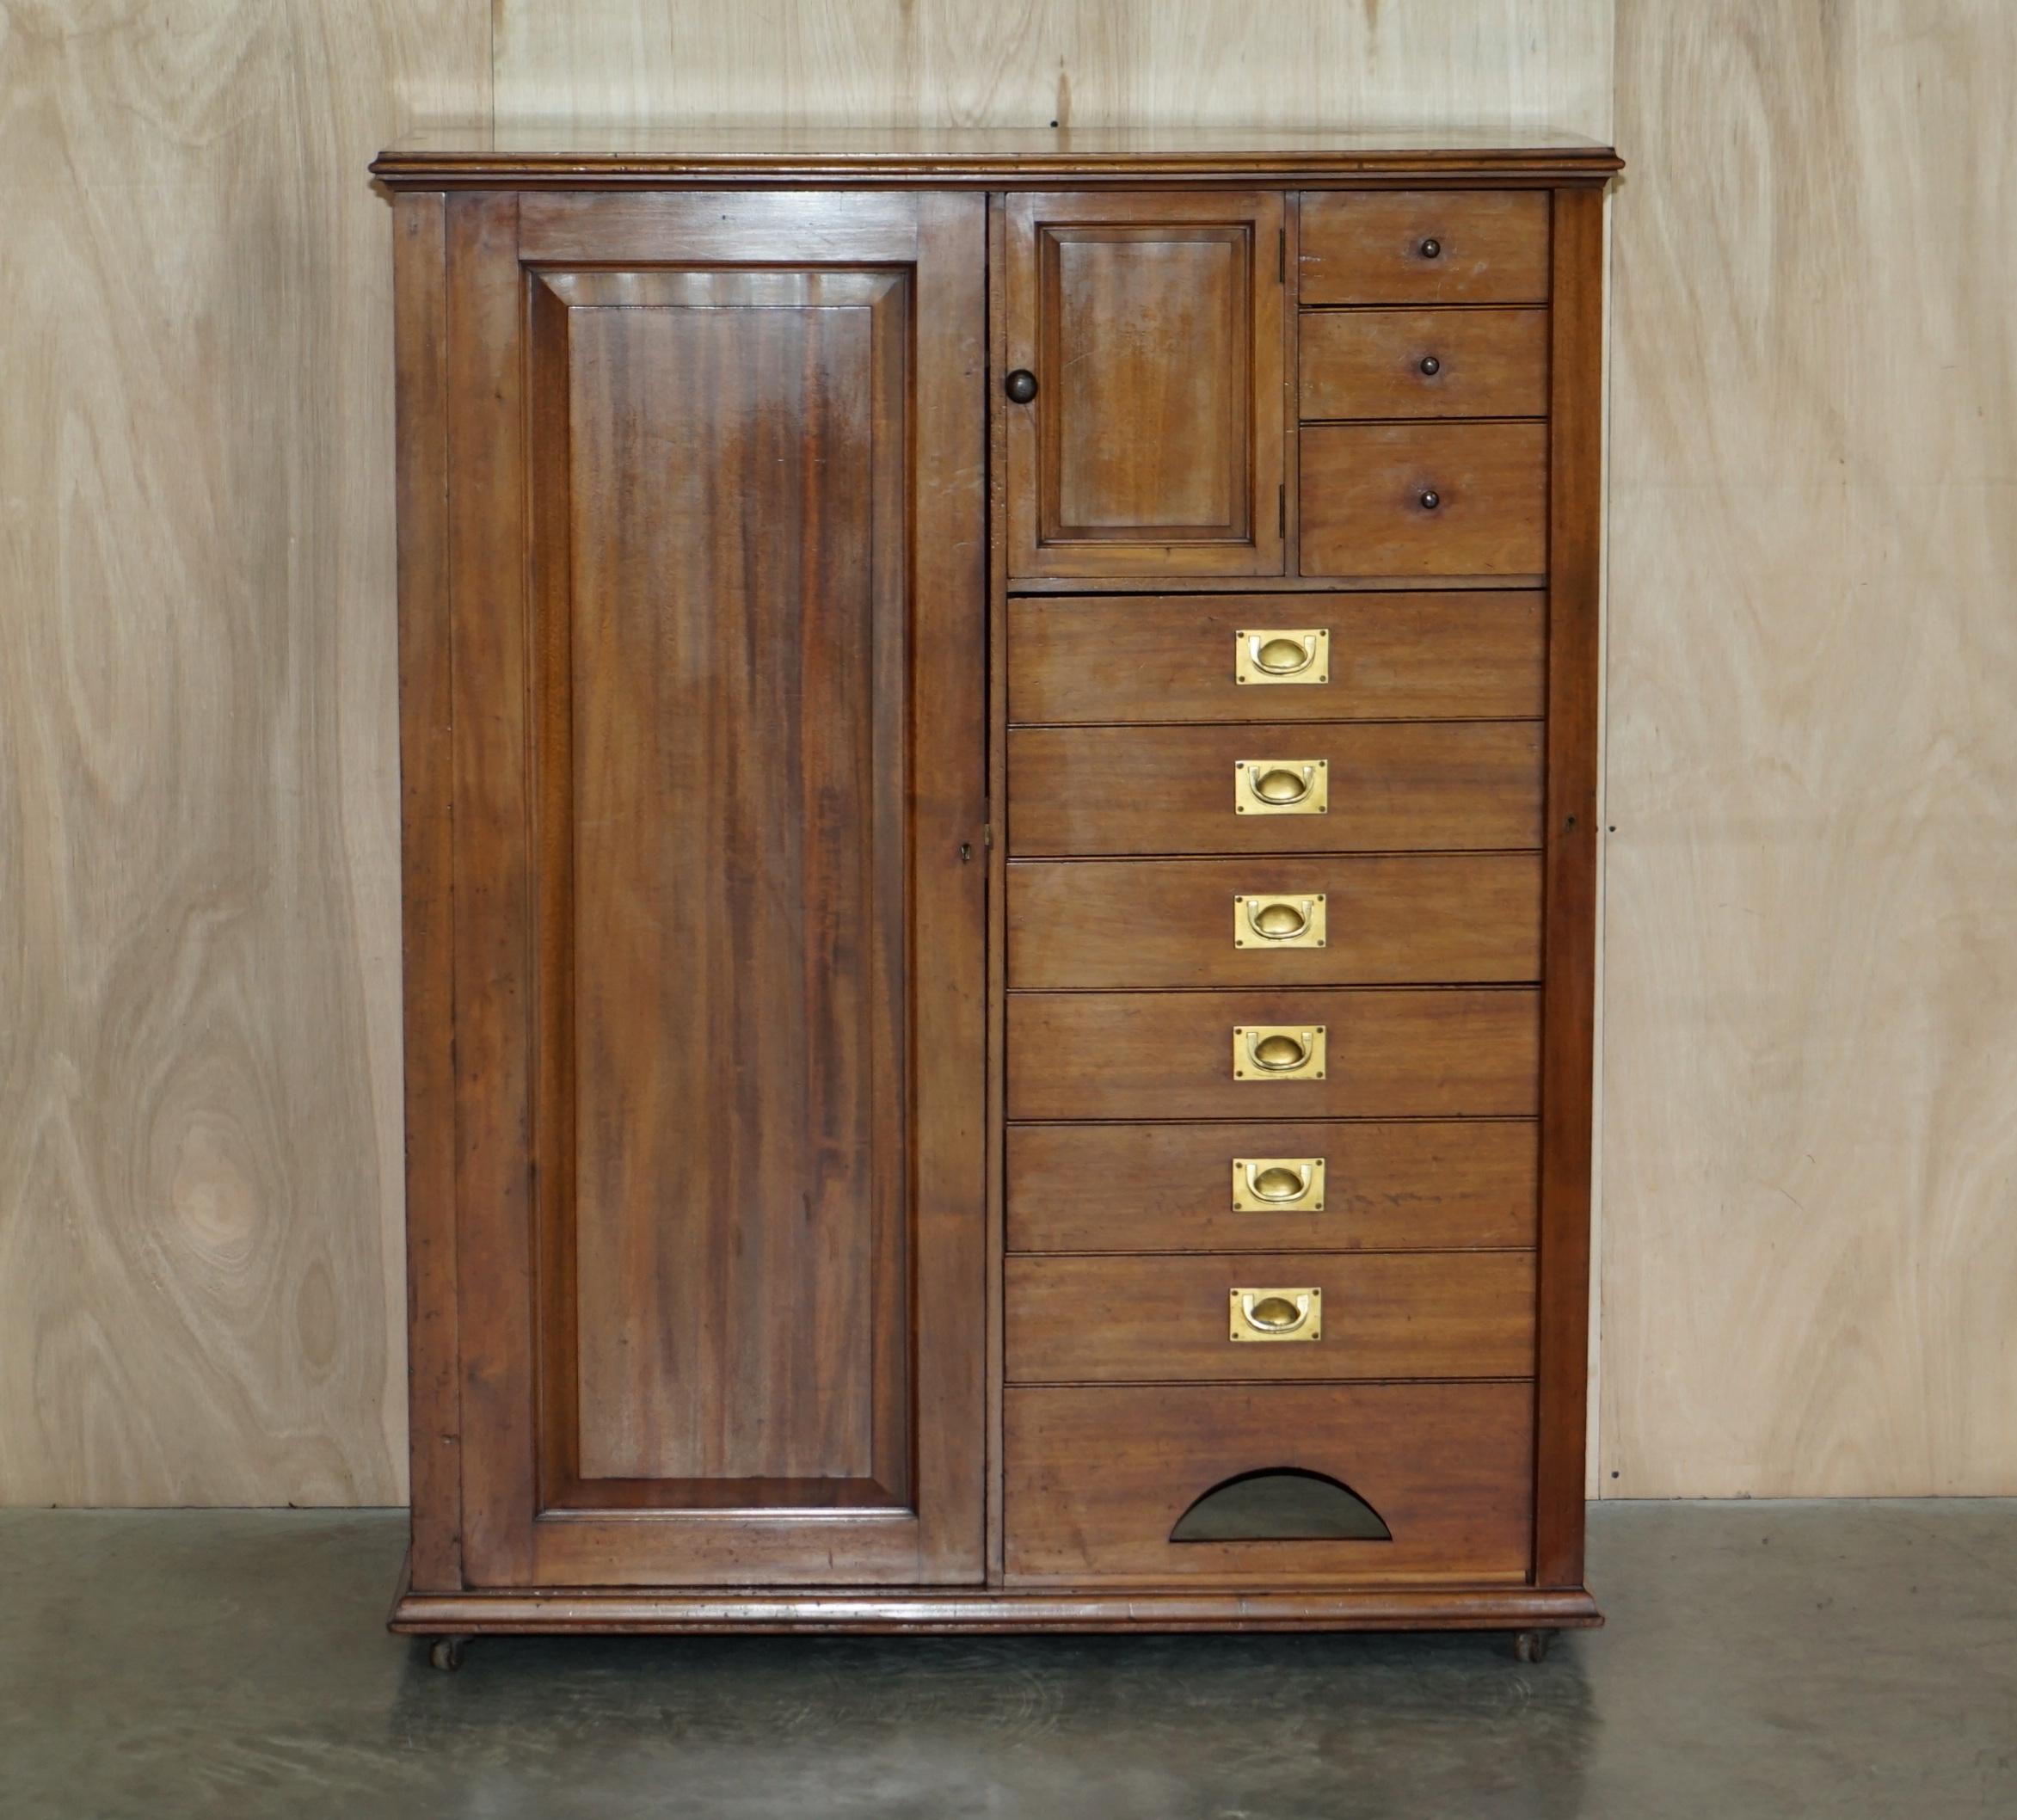 Royal House Antiques

Royal House Antiques is delighted to offer for sale this absolutely sublime circa 1860-1880 original gentleman’s military campaign compendium wardrobe with drawers

Please note the delivery fee listed is just a guide, it covers